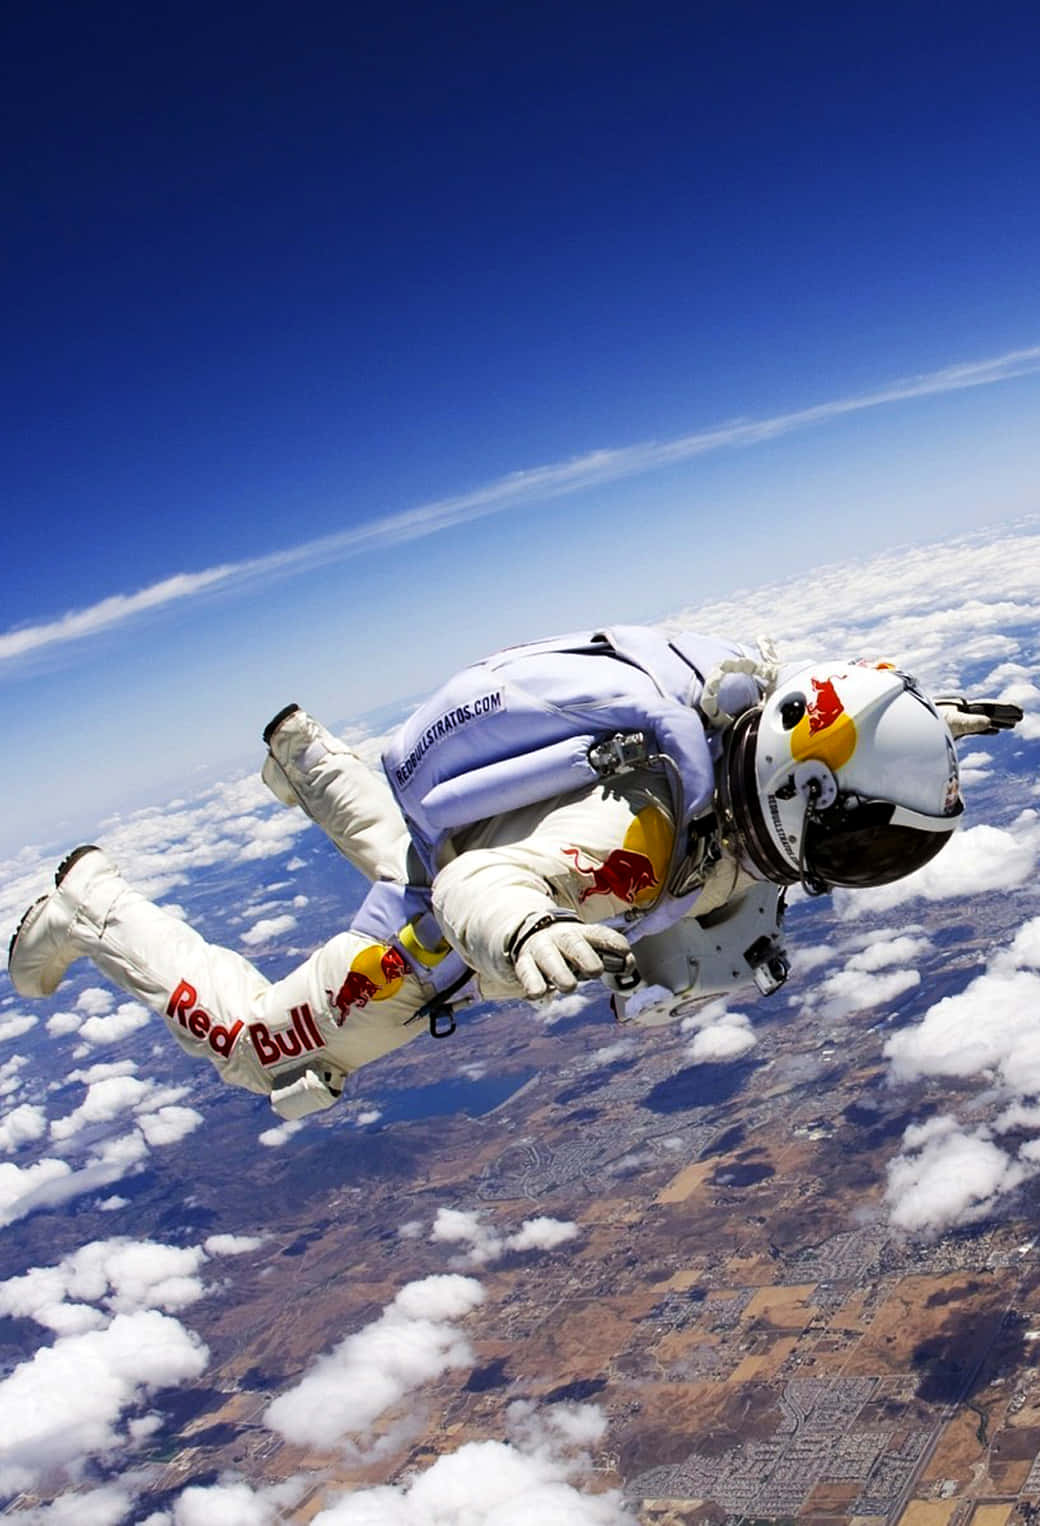 Skydiving Free Falling On Snowy Land Background